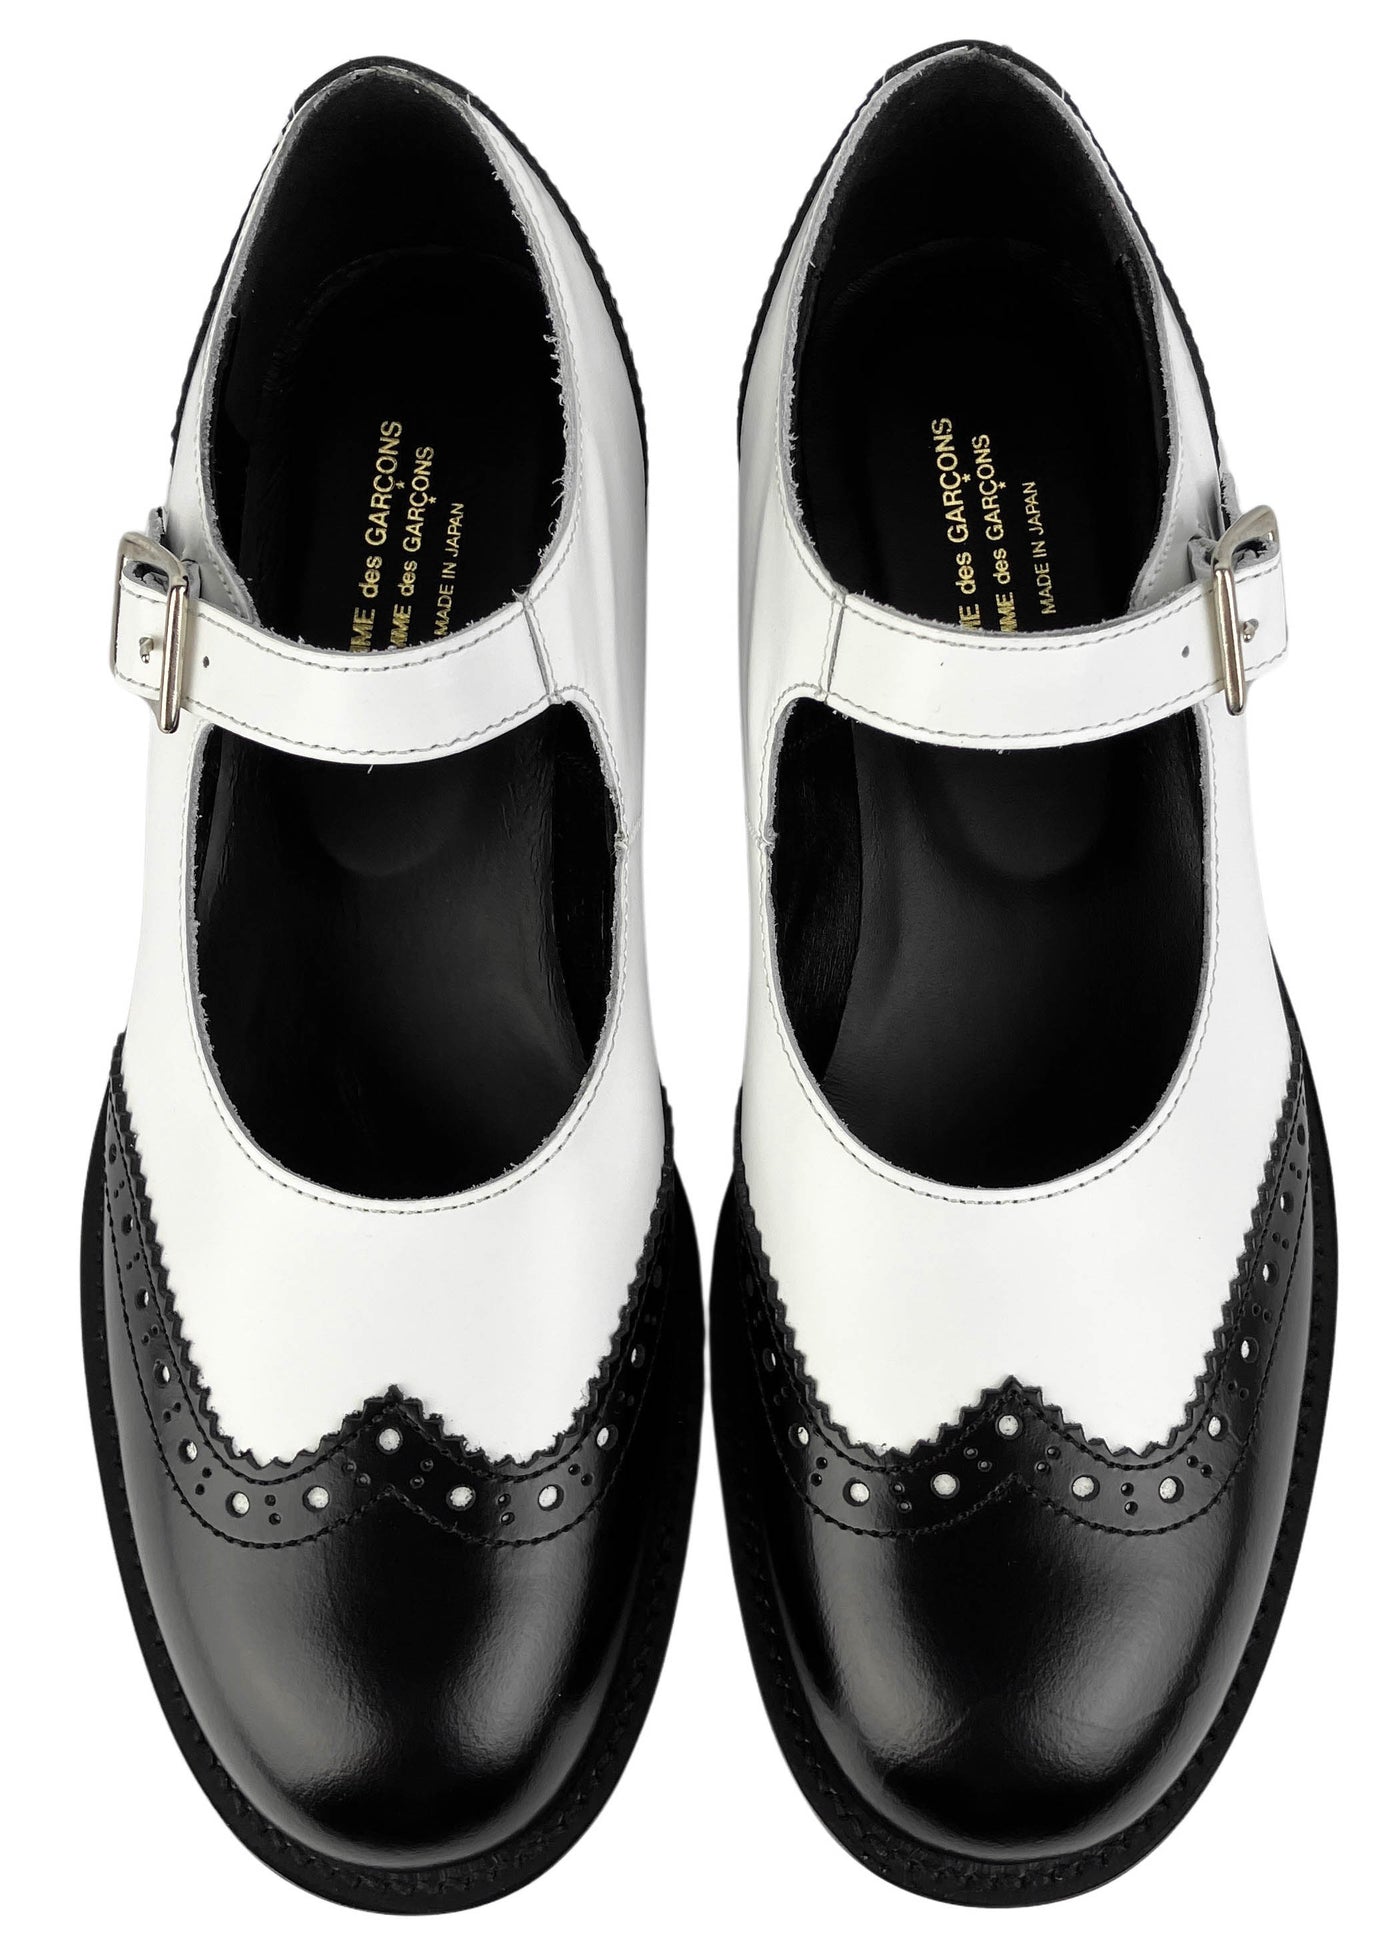 COMME des GARÇONS Mary Janes in Black and White - Discounts on Comme des Garçons at UAL